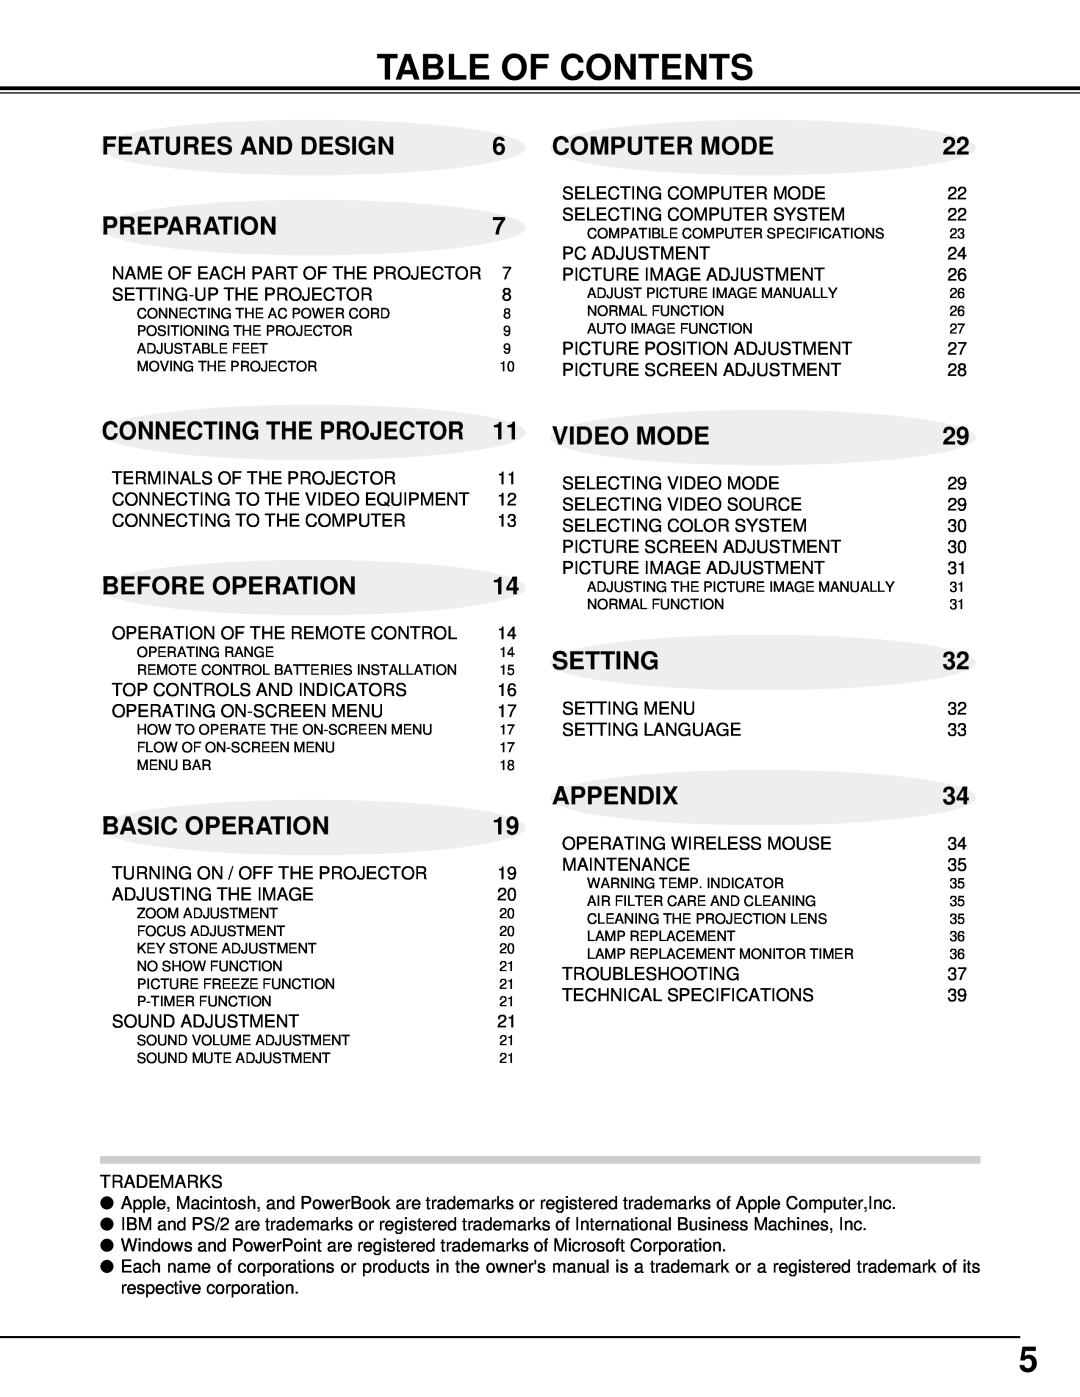 Canon 5100 Table Of Contents, Features And Design, Computer Mode, Preparation, Video Mode, Before Operation, Setting 